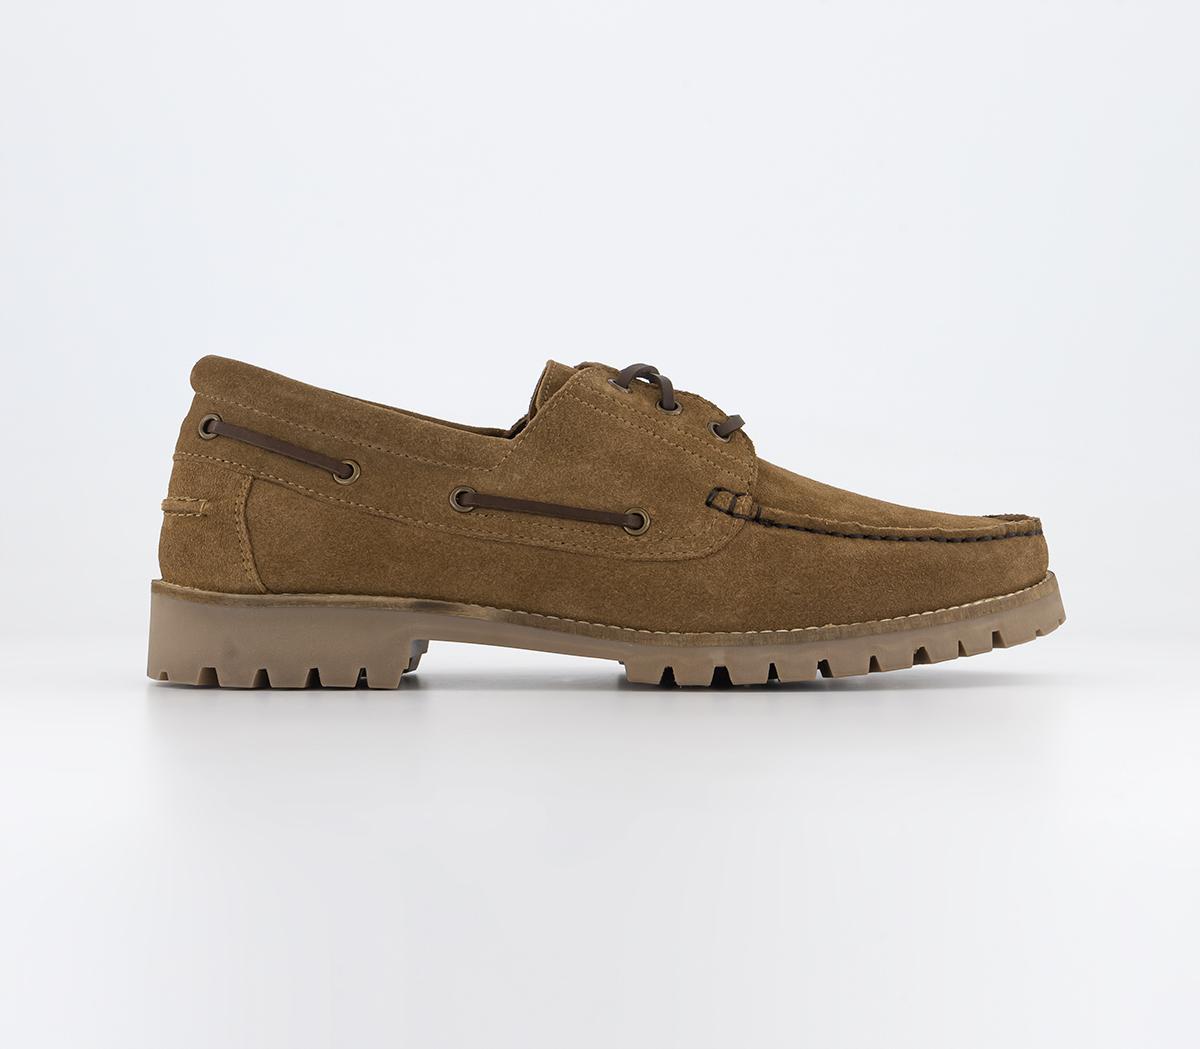 Colorado Cleated Suede Boat Shoes Brown Suede